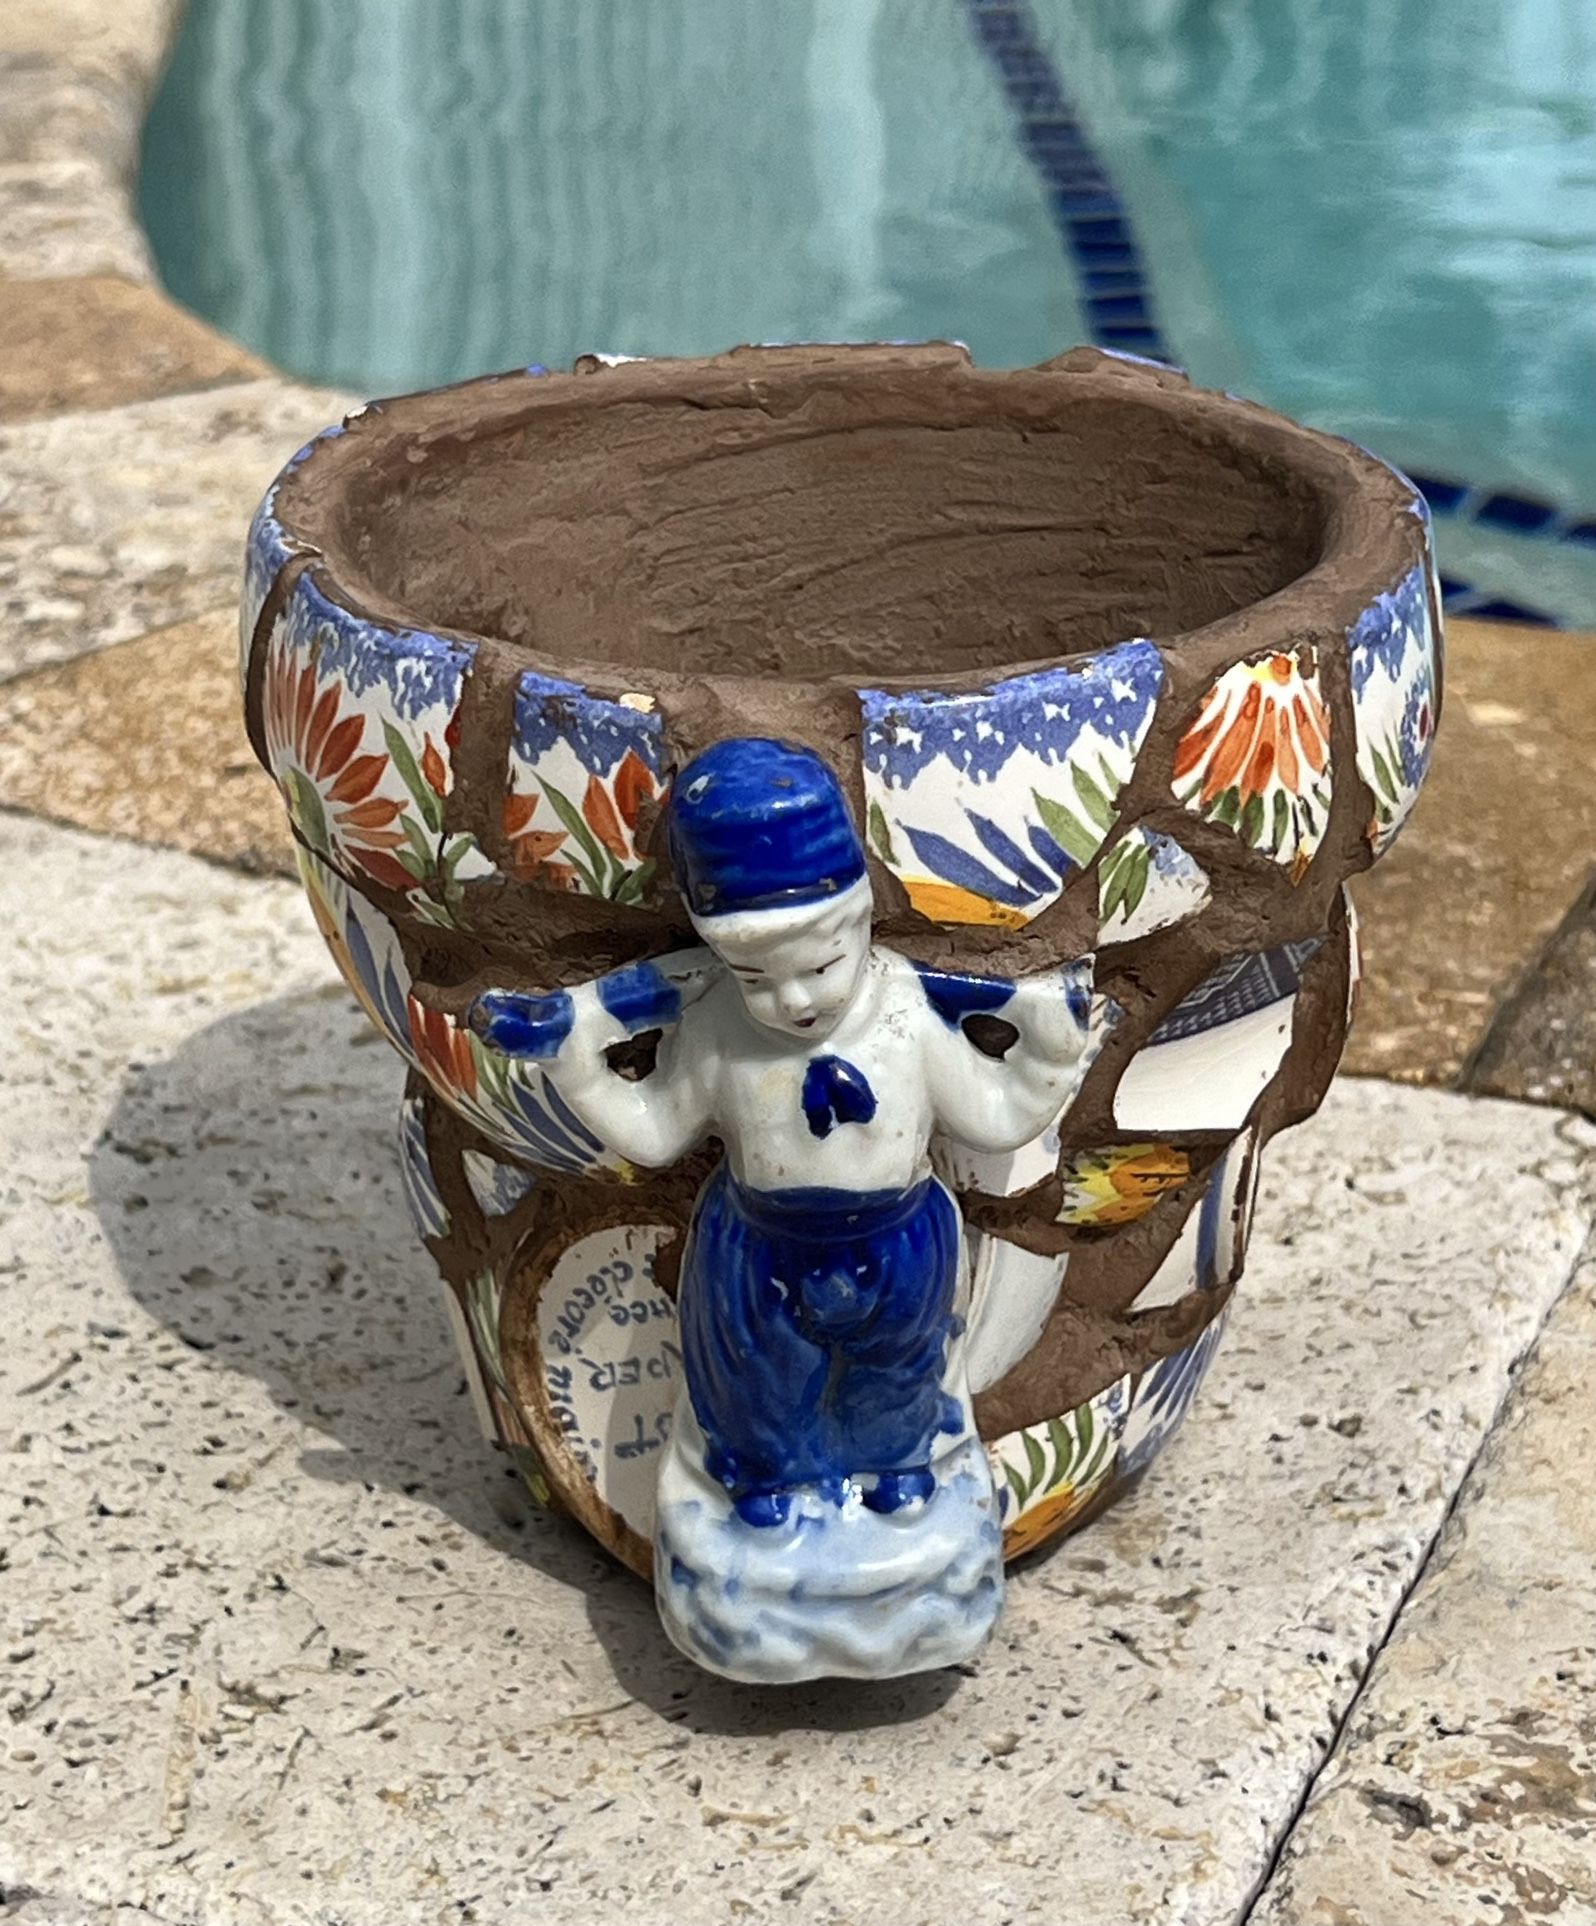 Gorgeous Handmade Mosaic  Planter Garden Flower Pot Made with Vintage China and Ceramic Pieces.